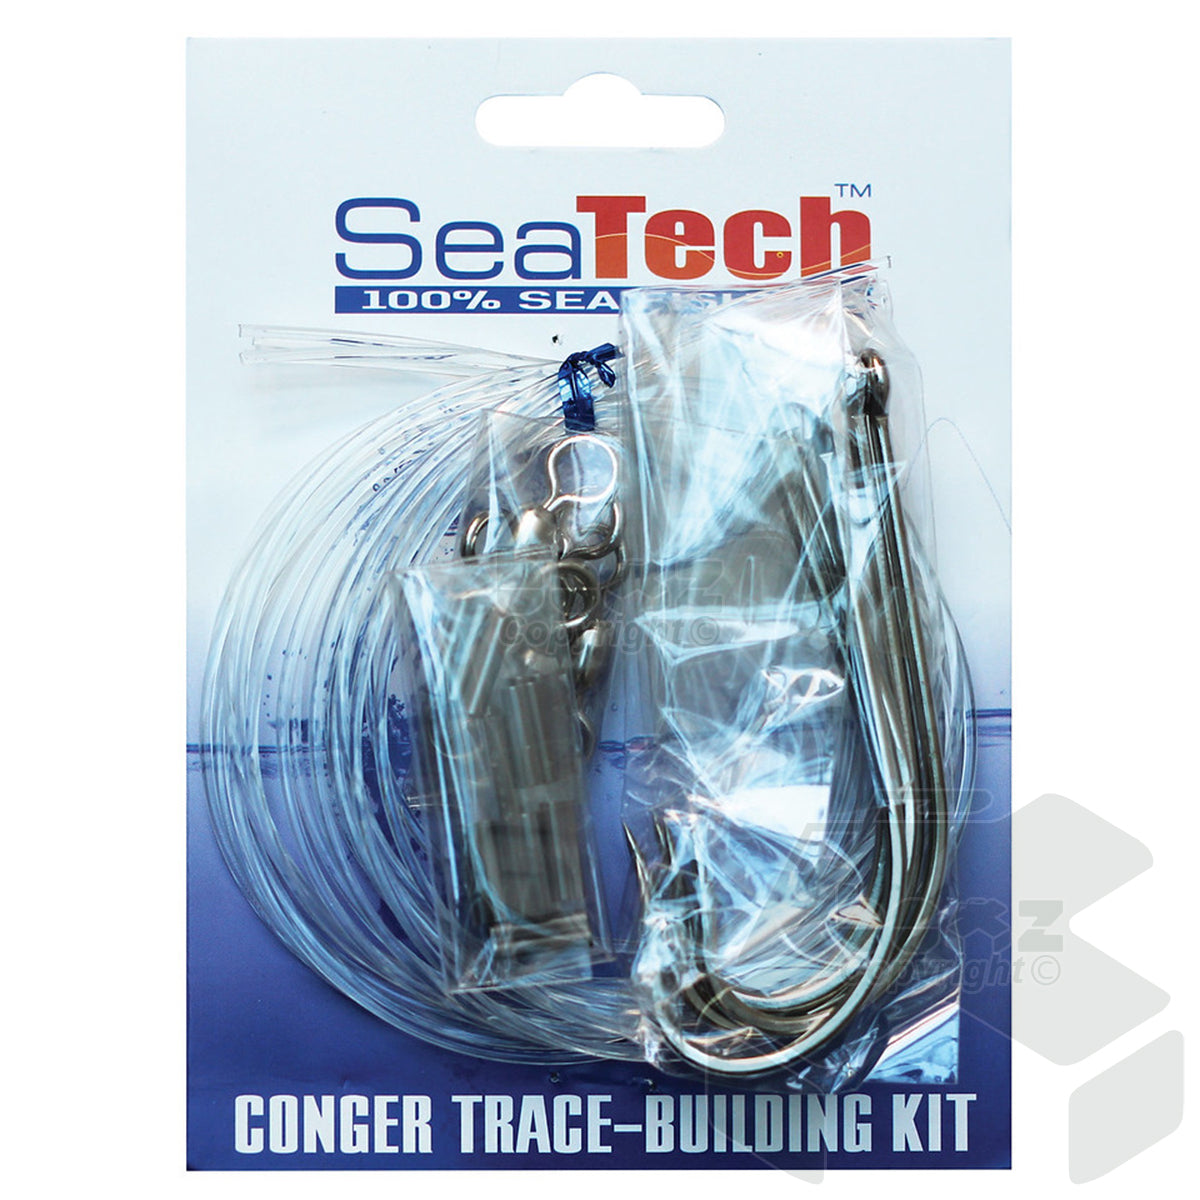 Seatech Tope Trace Making Kit